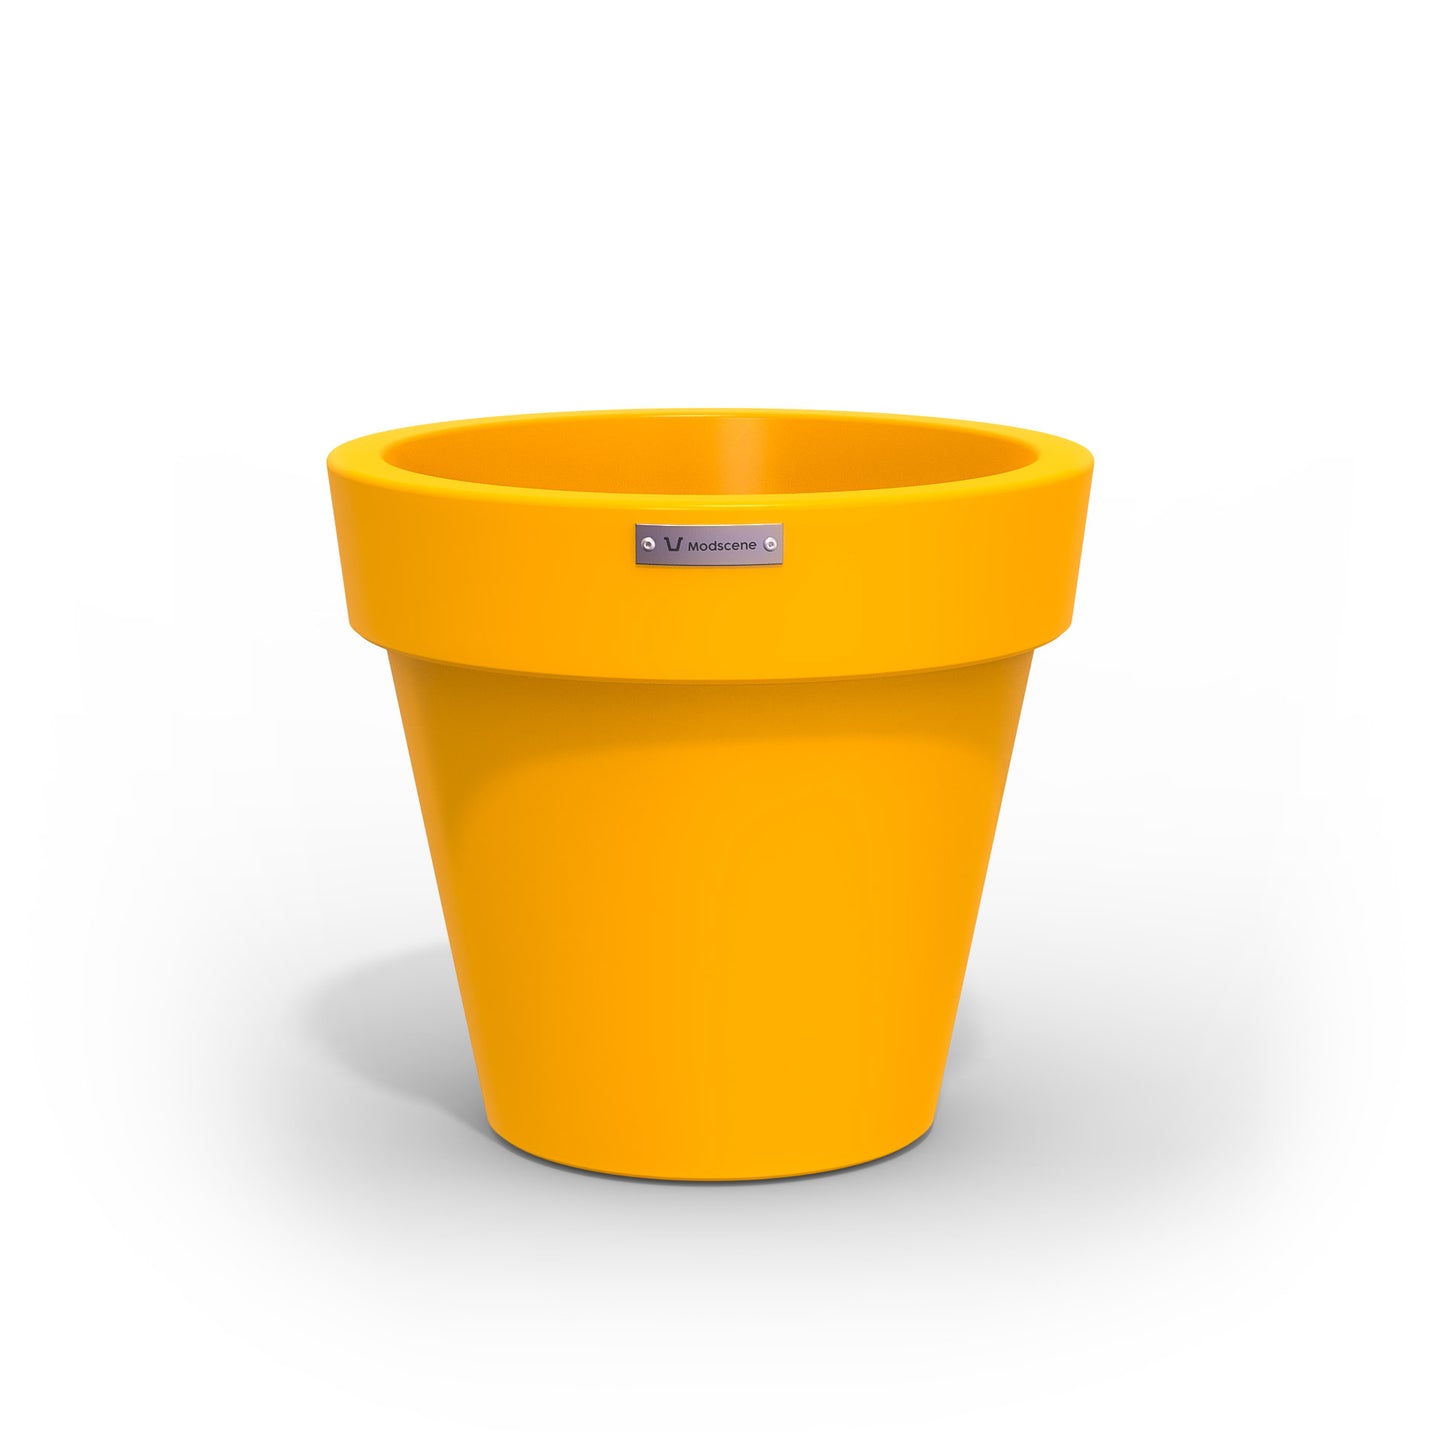 A small yellow planter pot made by Modscene.